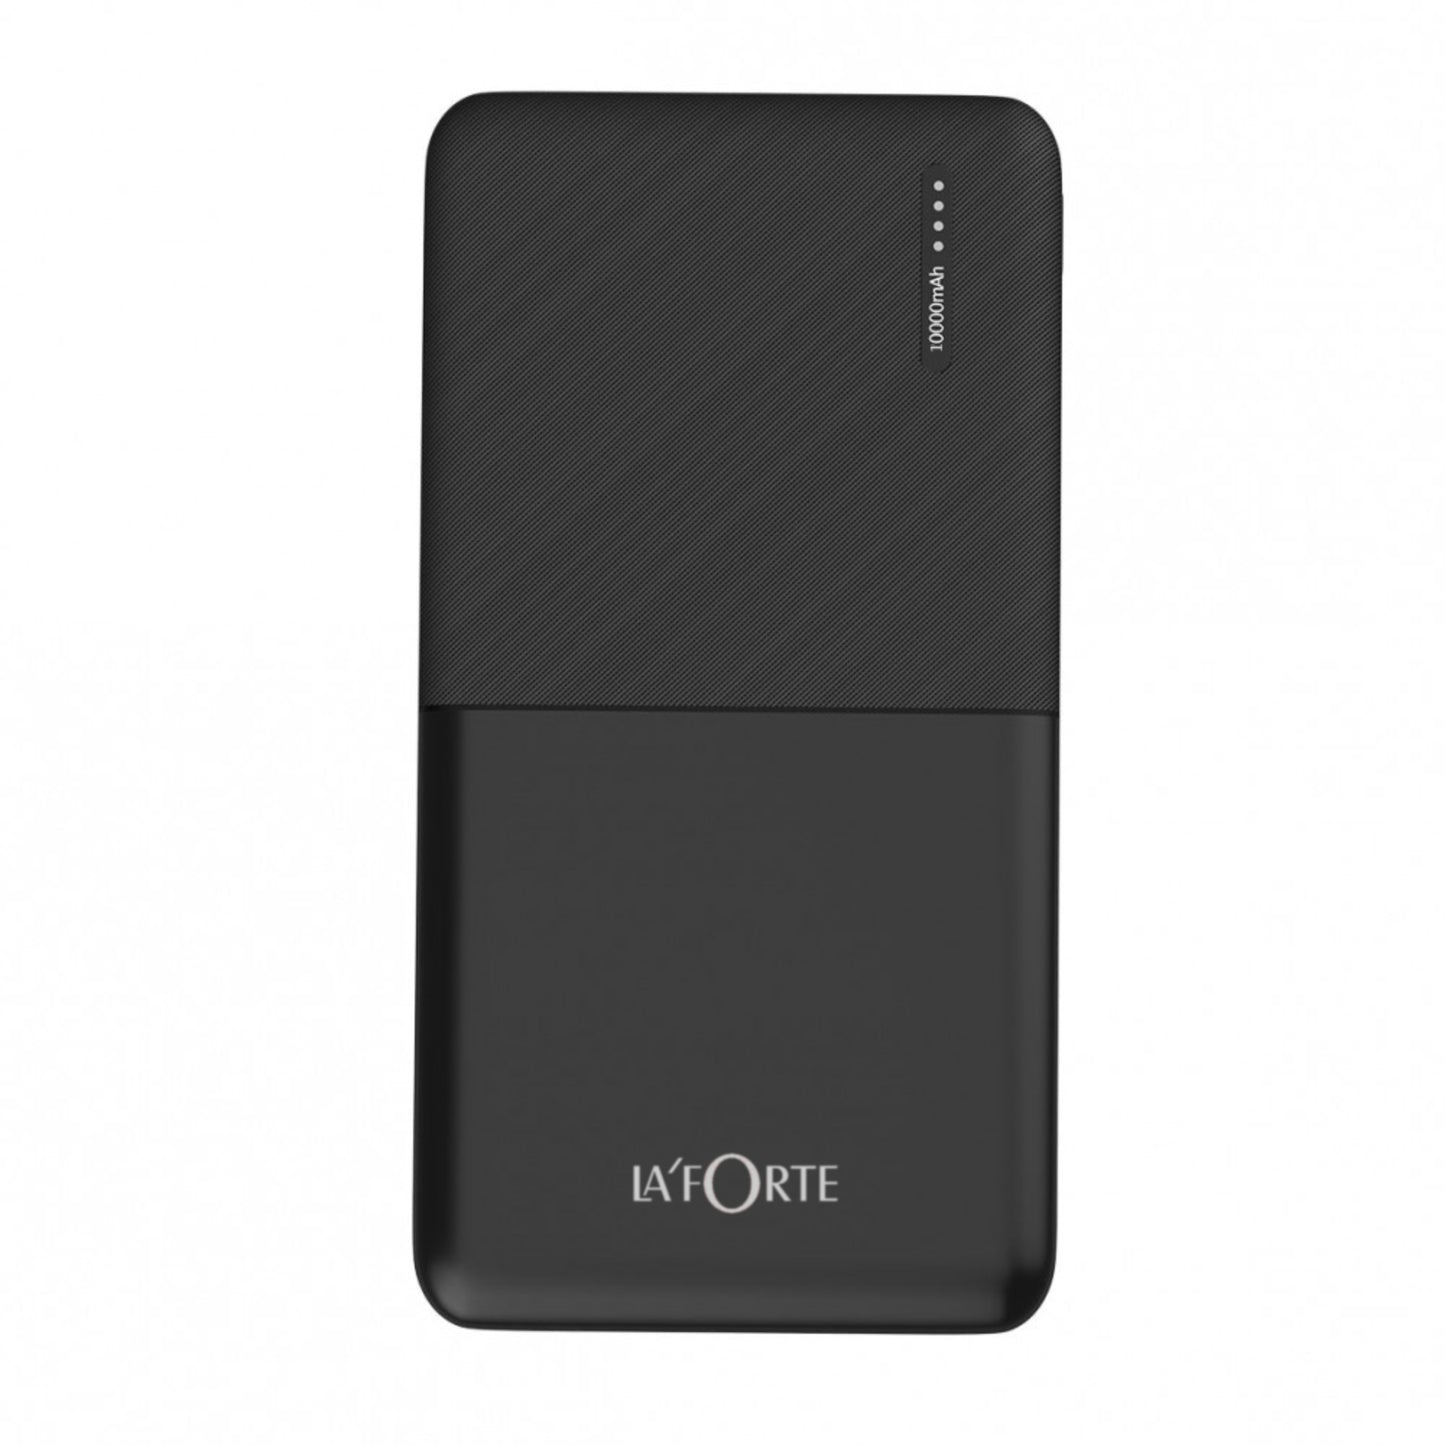 LA' FORTE 10000mAh 12W Lithium-Polymer Power Bank | Dual Input, Dual Output | Black, Type-C Cable Included